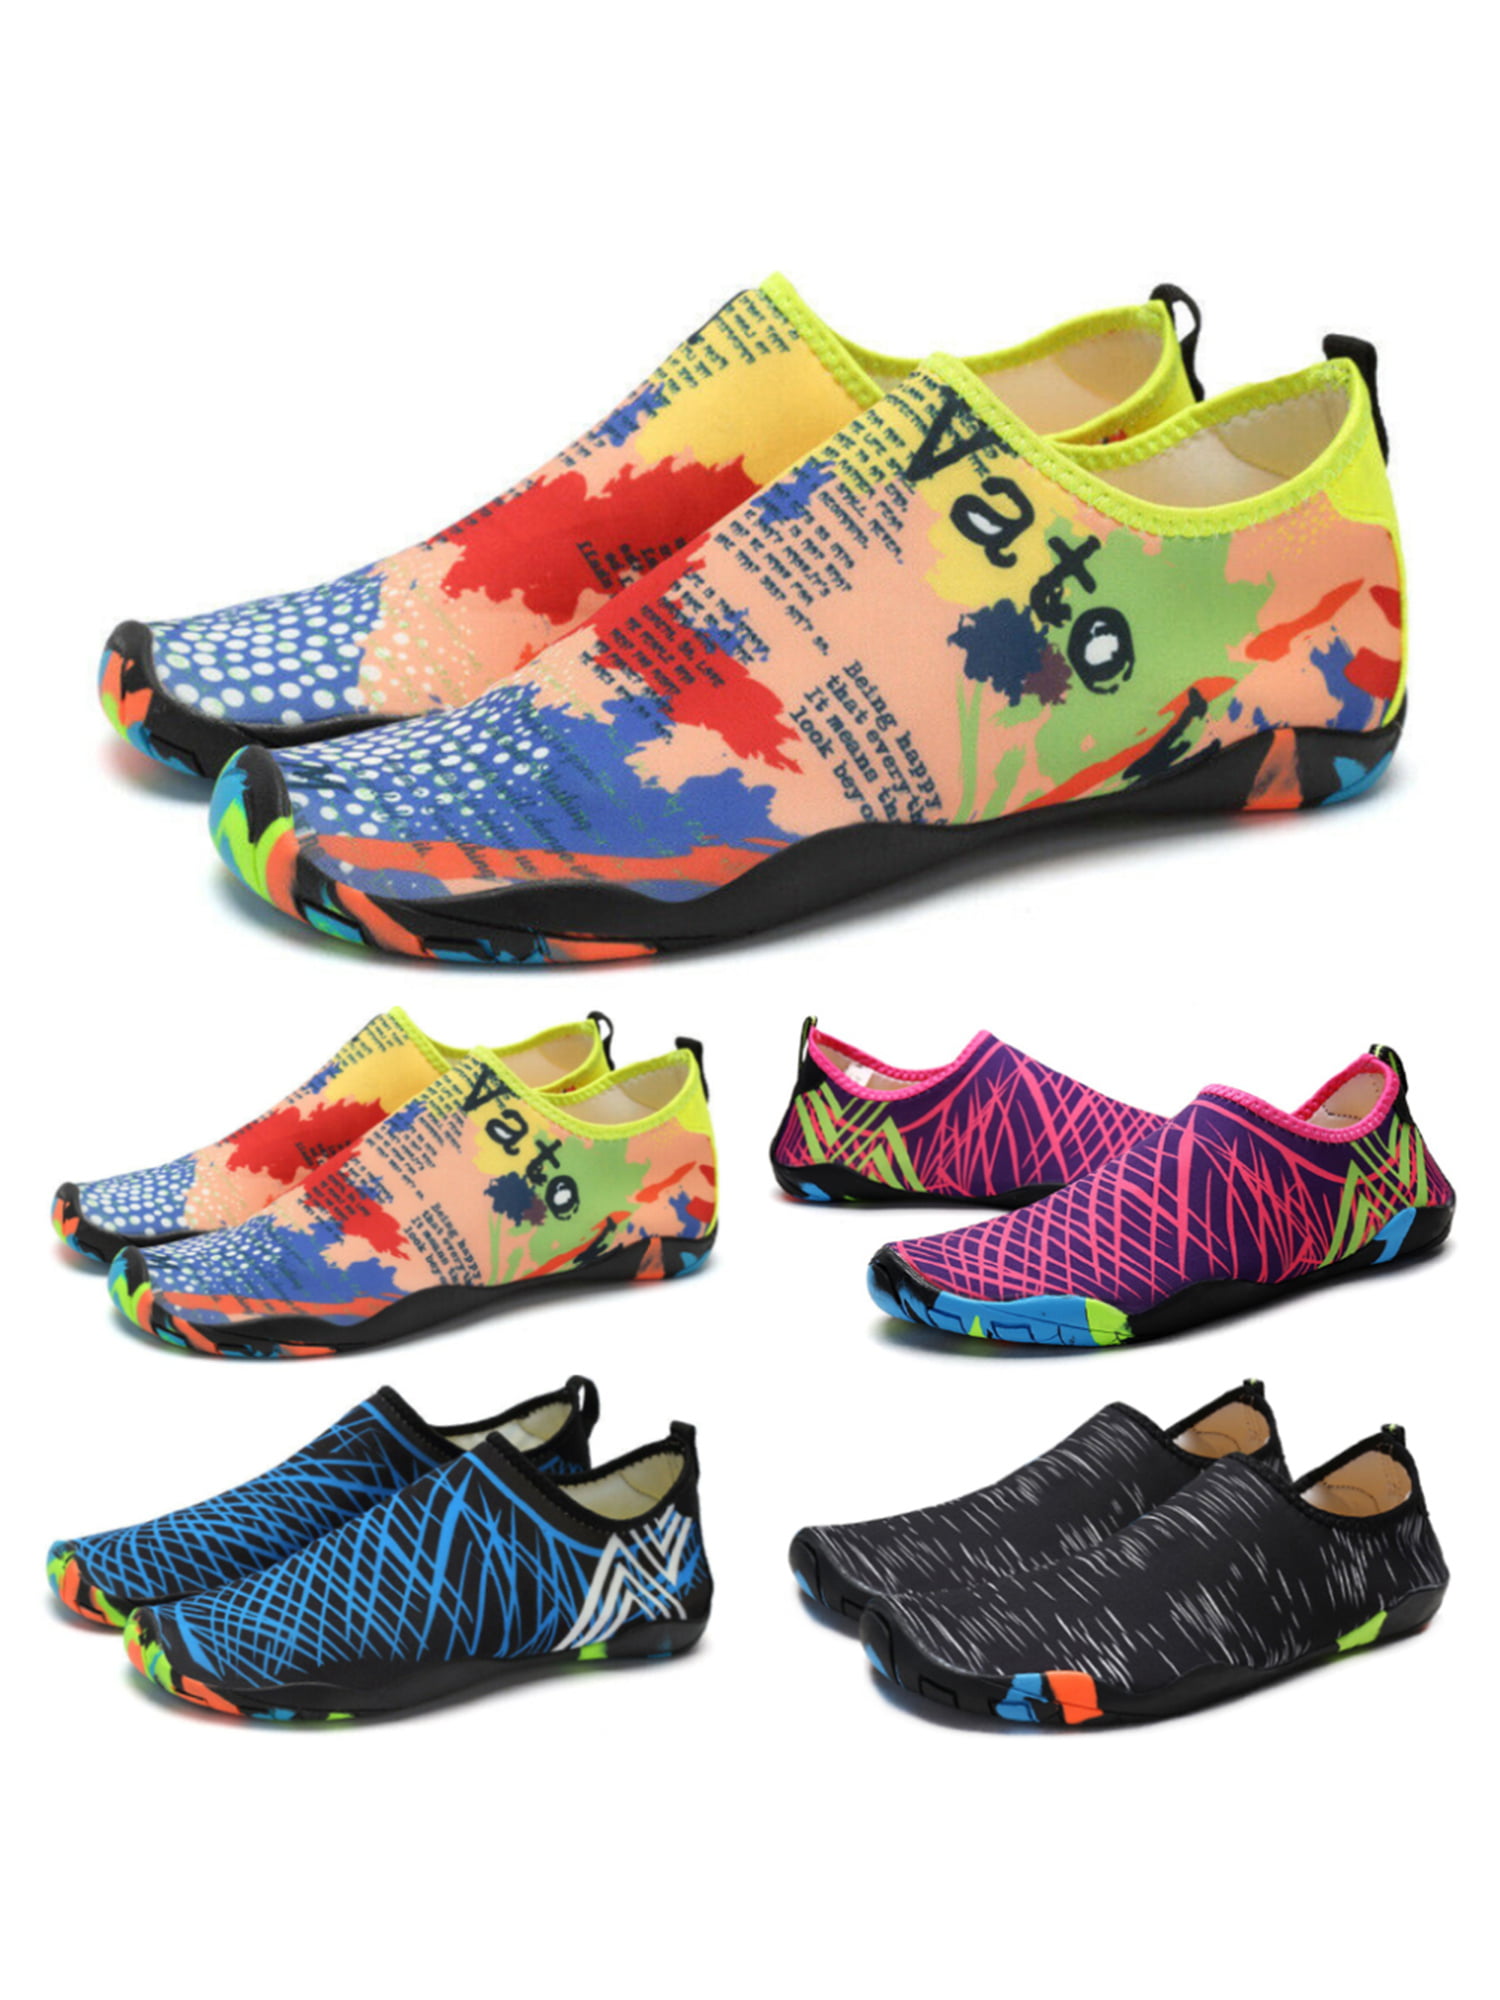 Mens Womens Aqua Surf Beach Sports Wet Water Shoes Outdoor Wetsuit Swimming New 